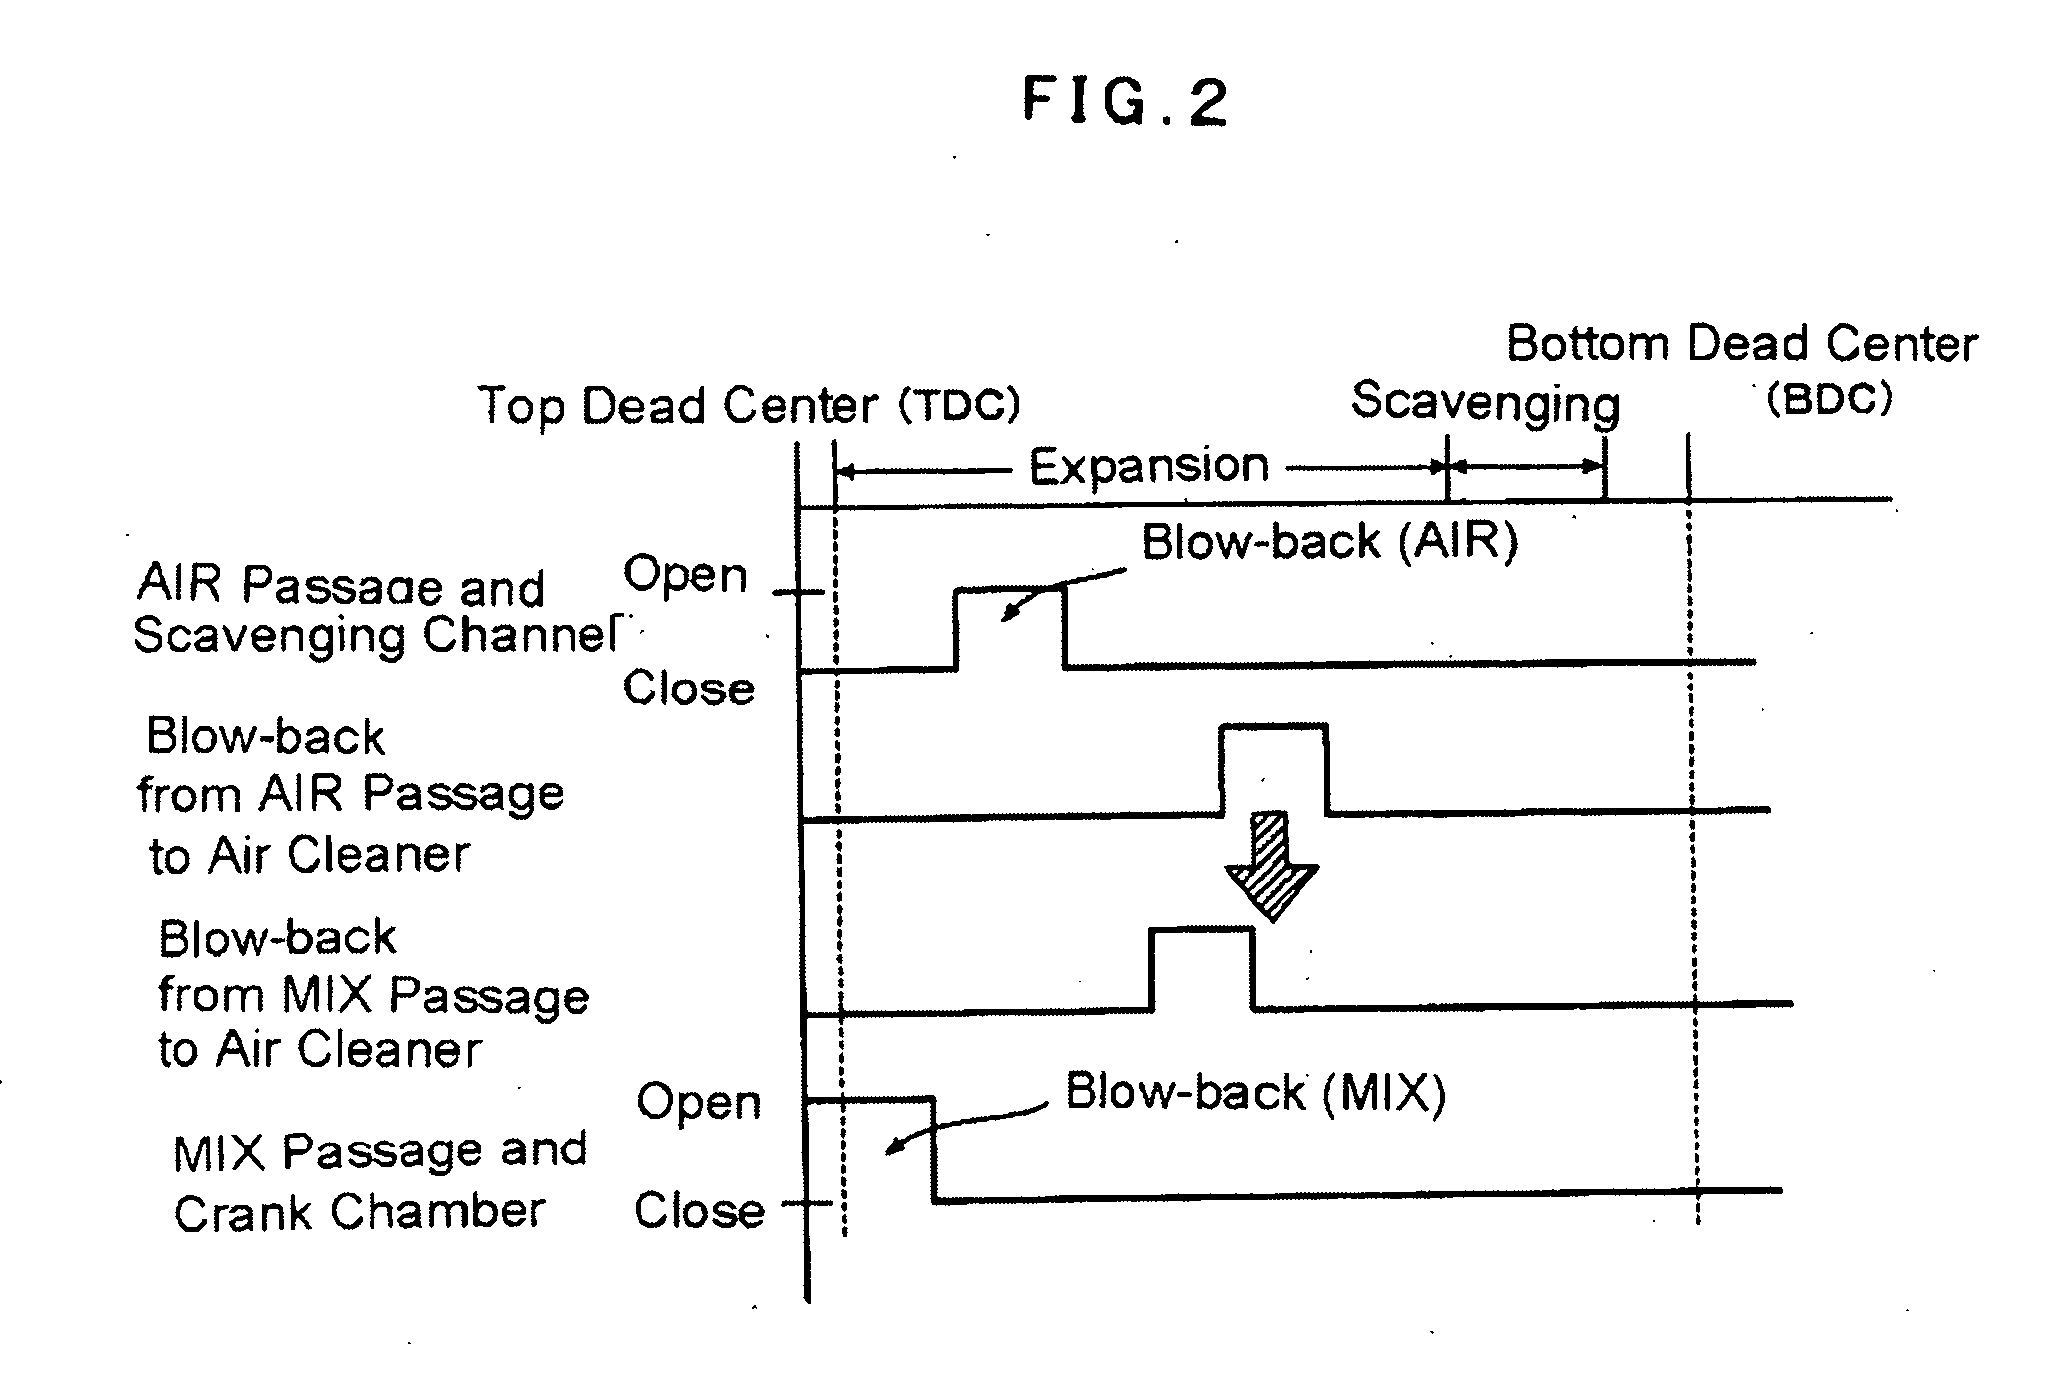 Air Cleaner For Stratified-Scavenging Two-Stroke Internal Combustion Engine